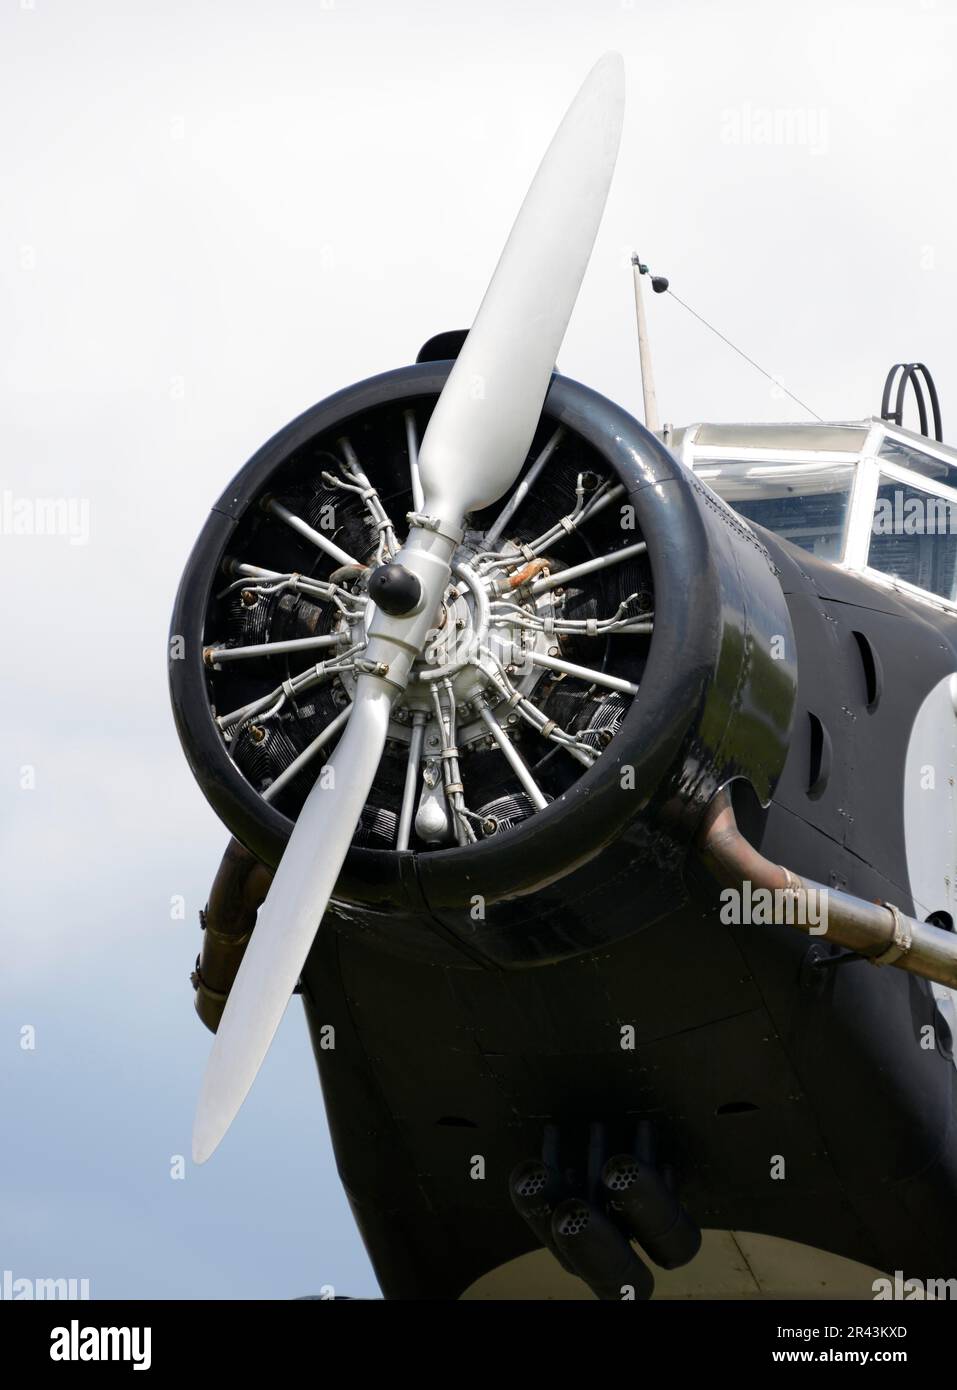 Propeller of an old historic aircraft Stock Photo